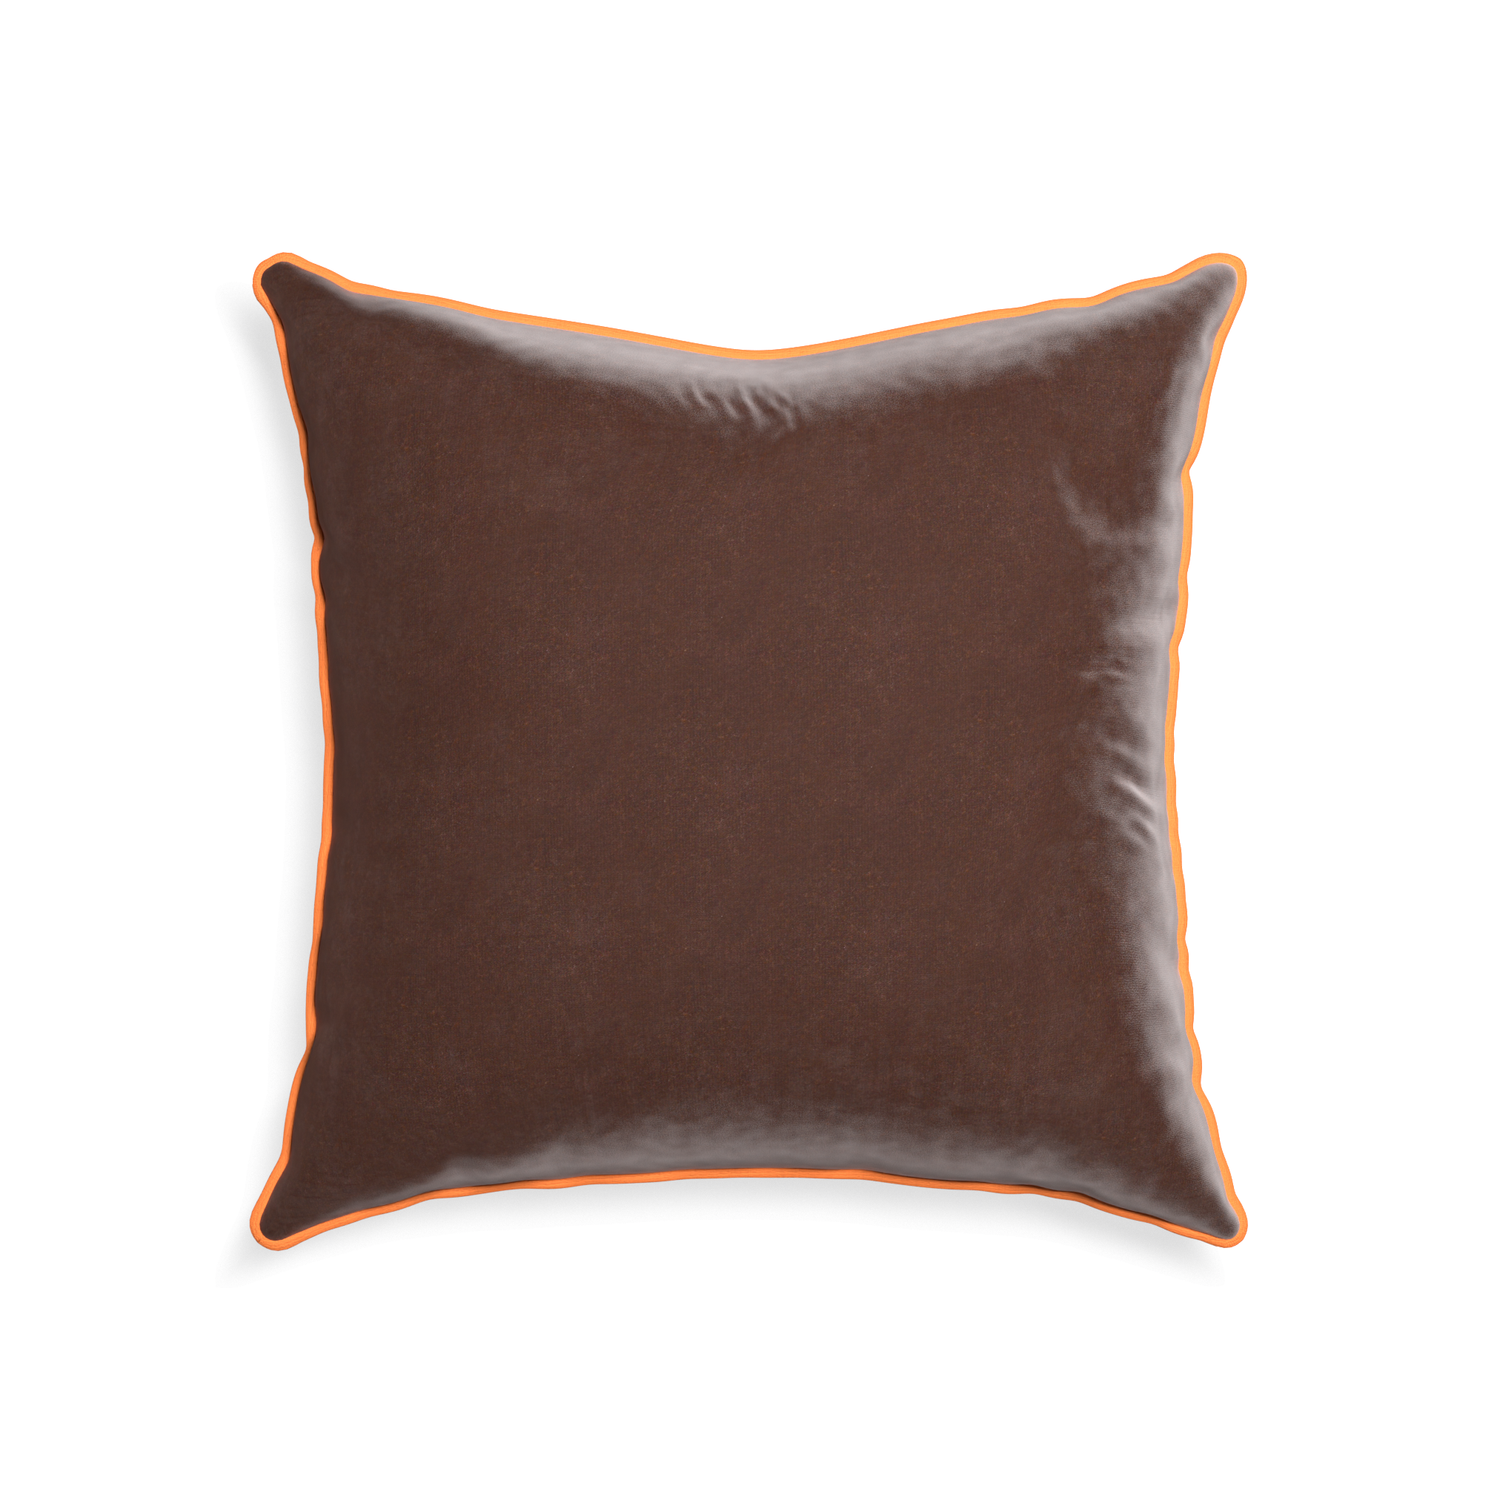 22-square walnut velvet custom pillow with clementine piping on white background